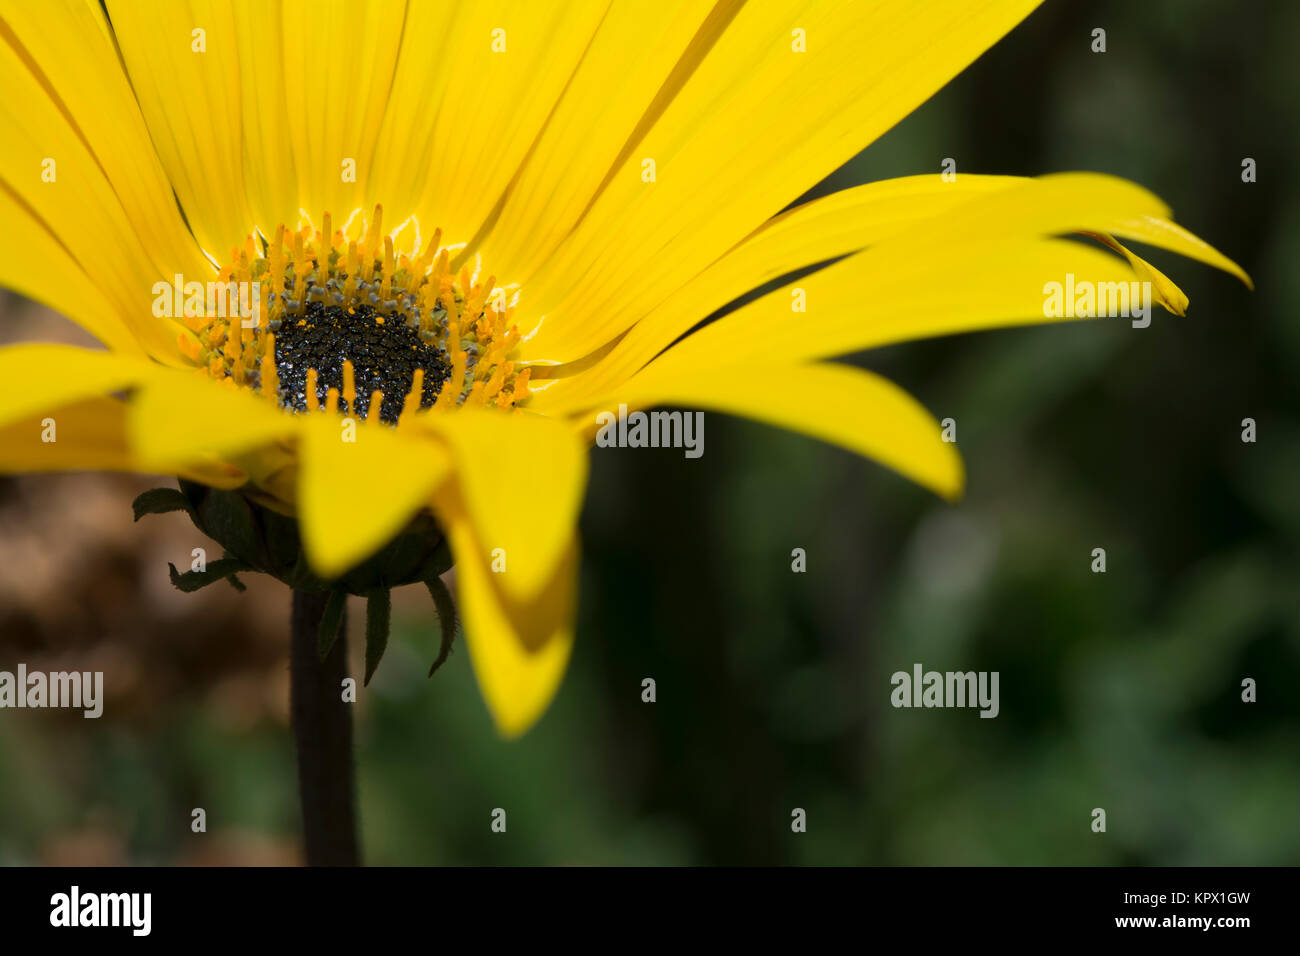 A single yellow arctotis flower head partially in view with the focus on the centre of the flower head. Stock Photo